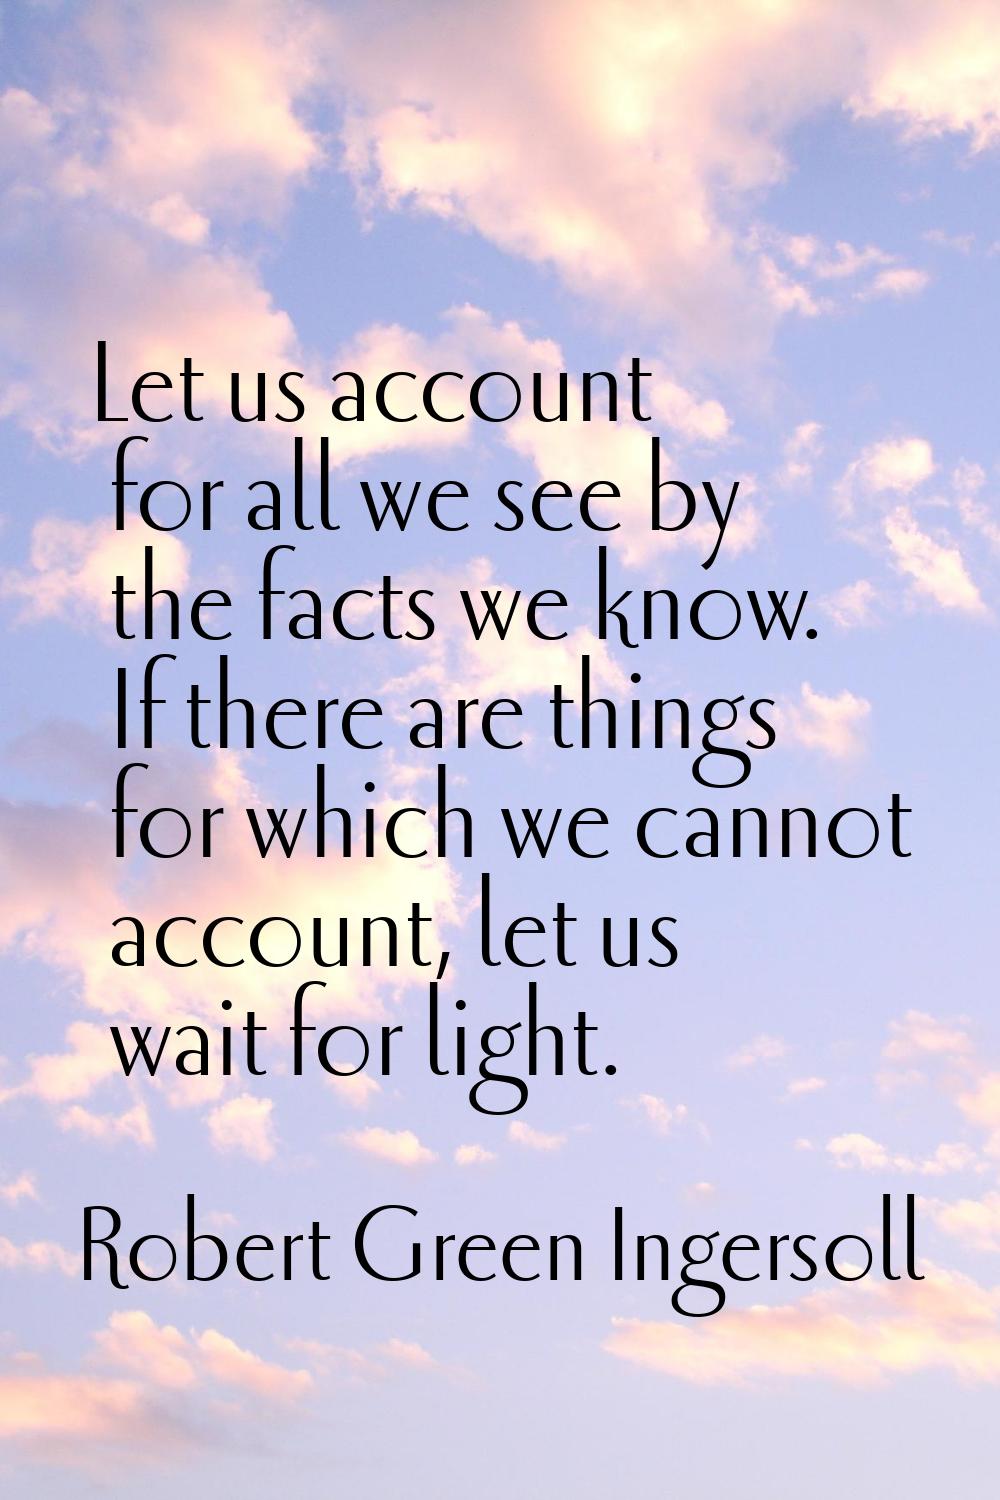 Let us account for all we see by the facts we know. If there are things for which we cannot account